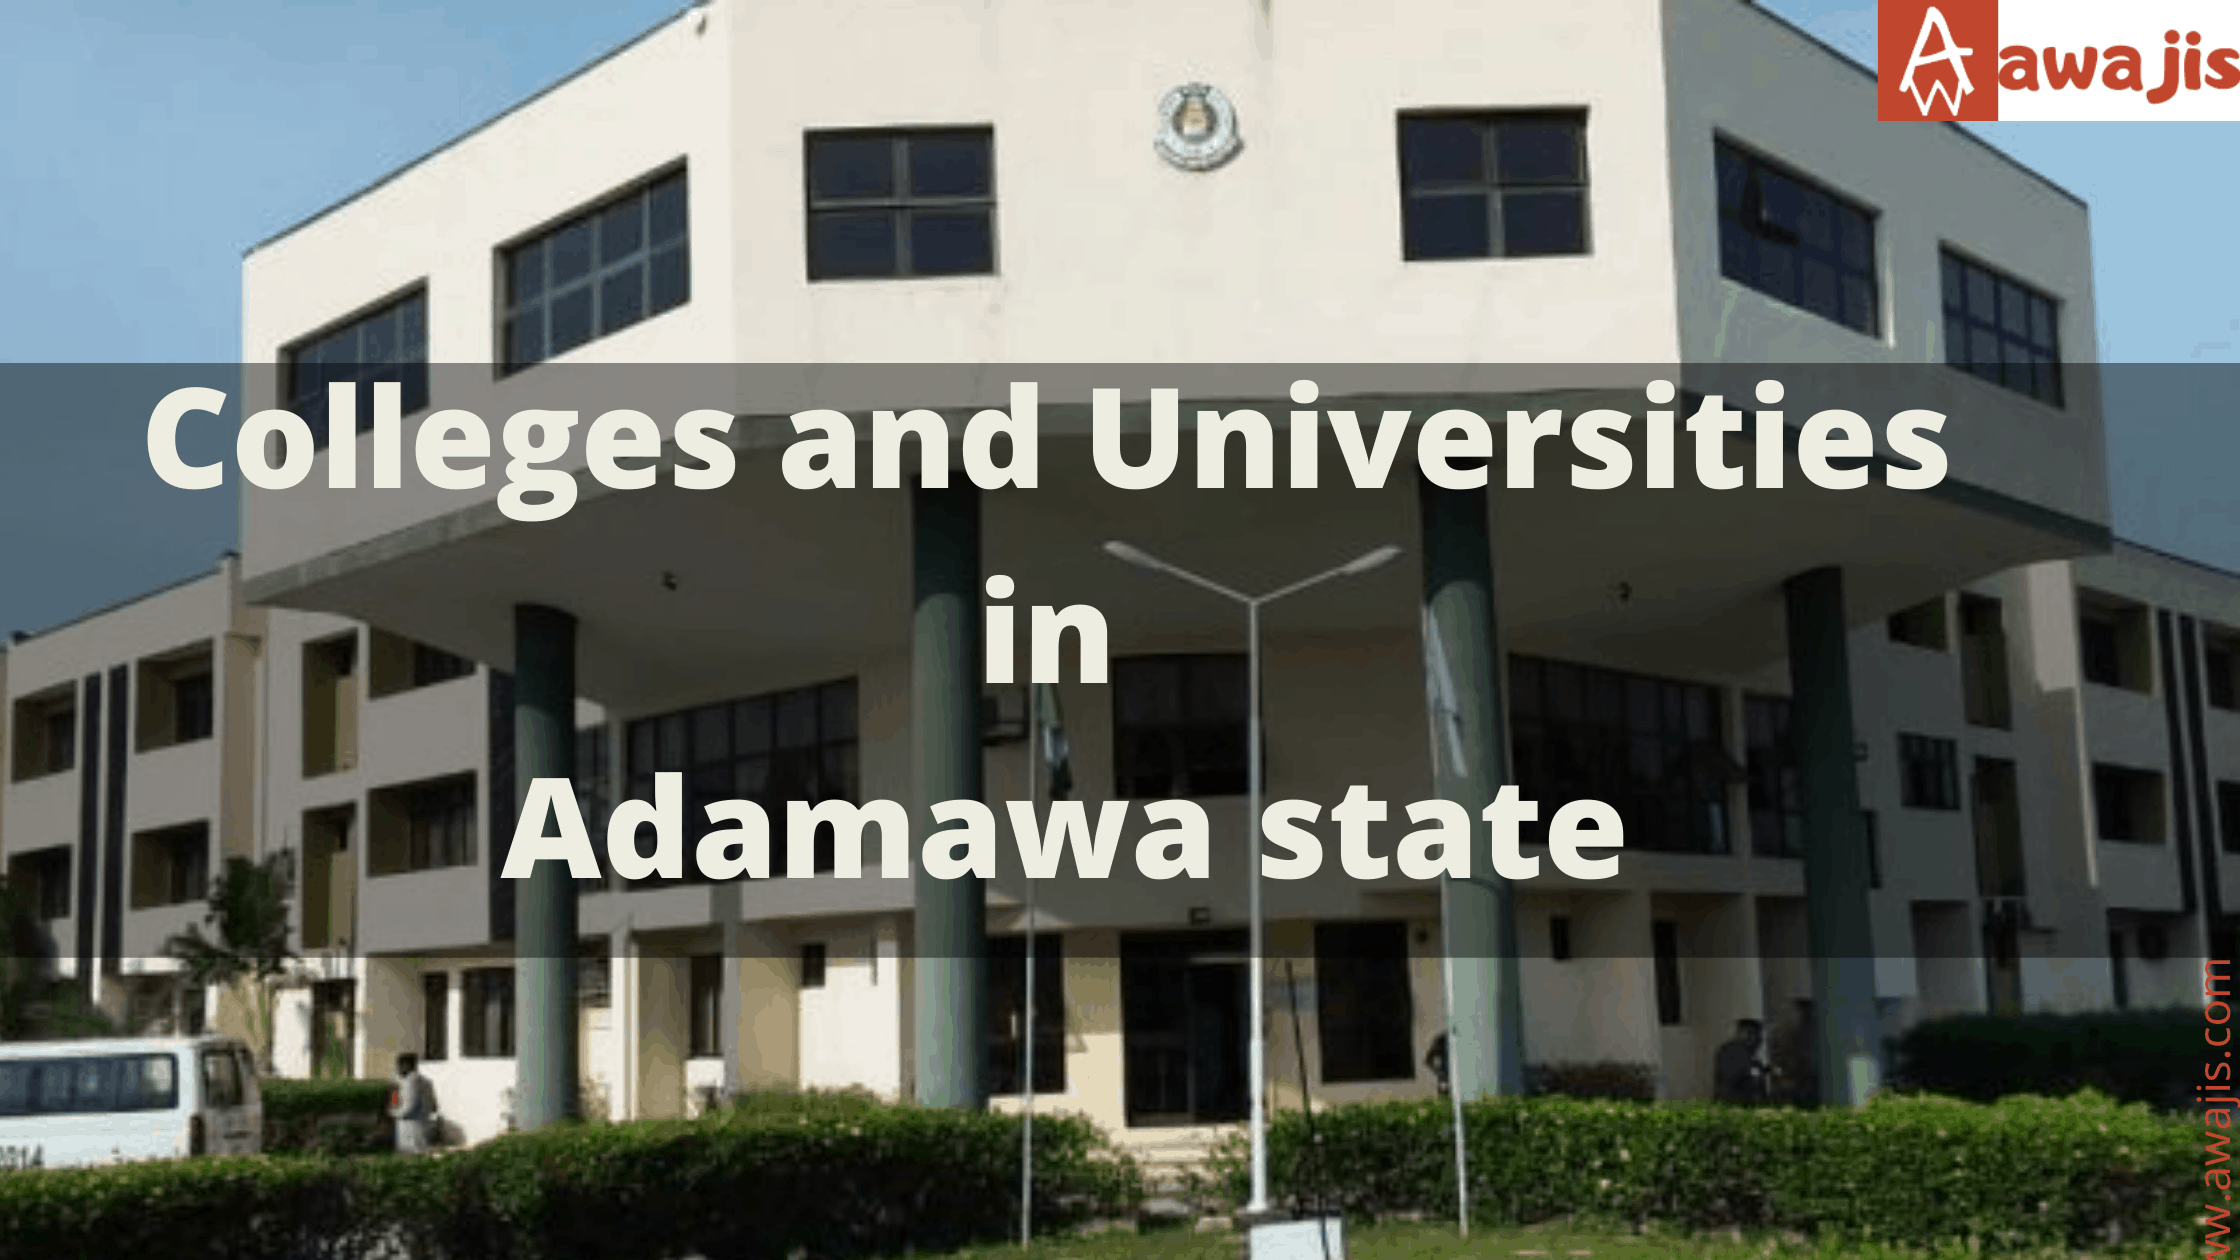 Colleges and Universities in Adamawa state